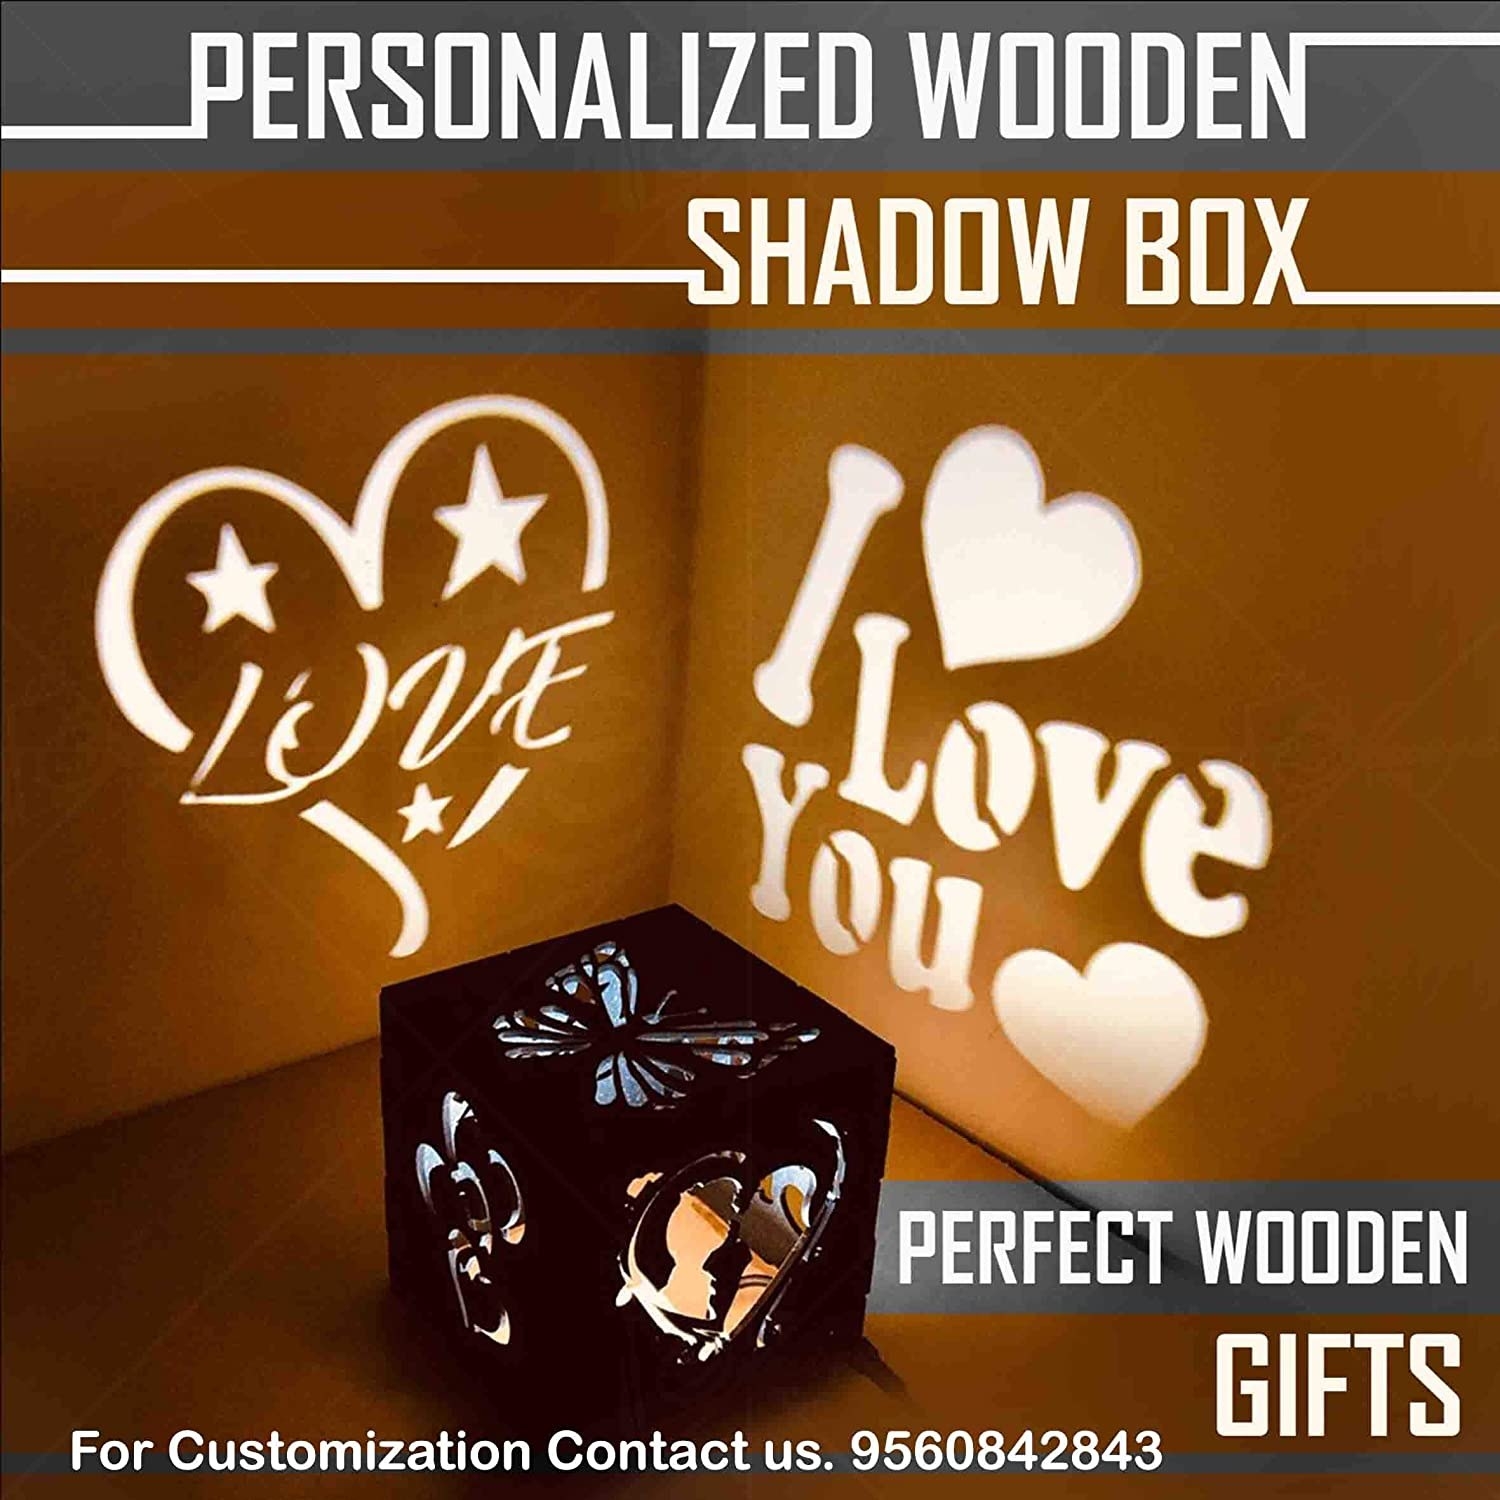 A wooden box with a customized message